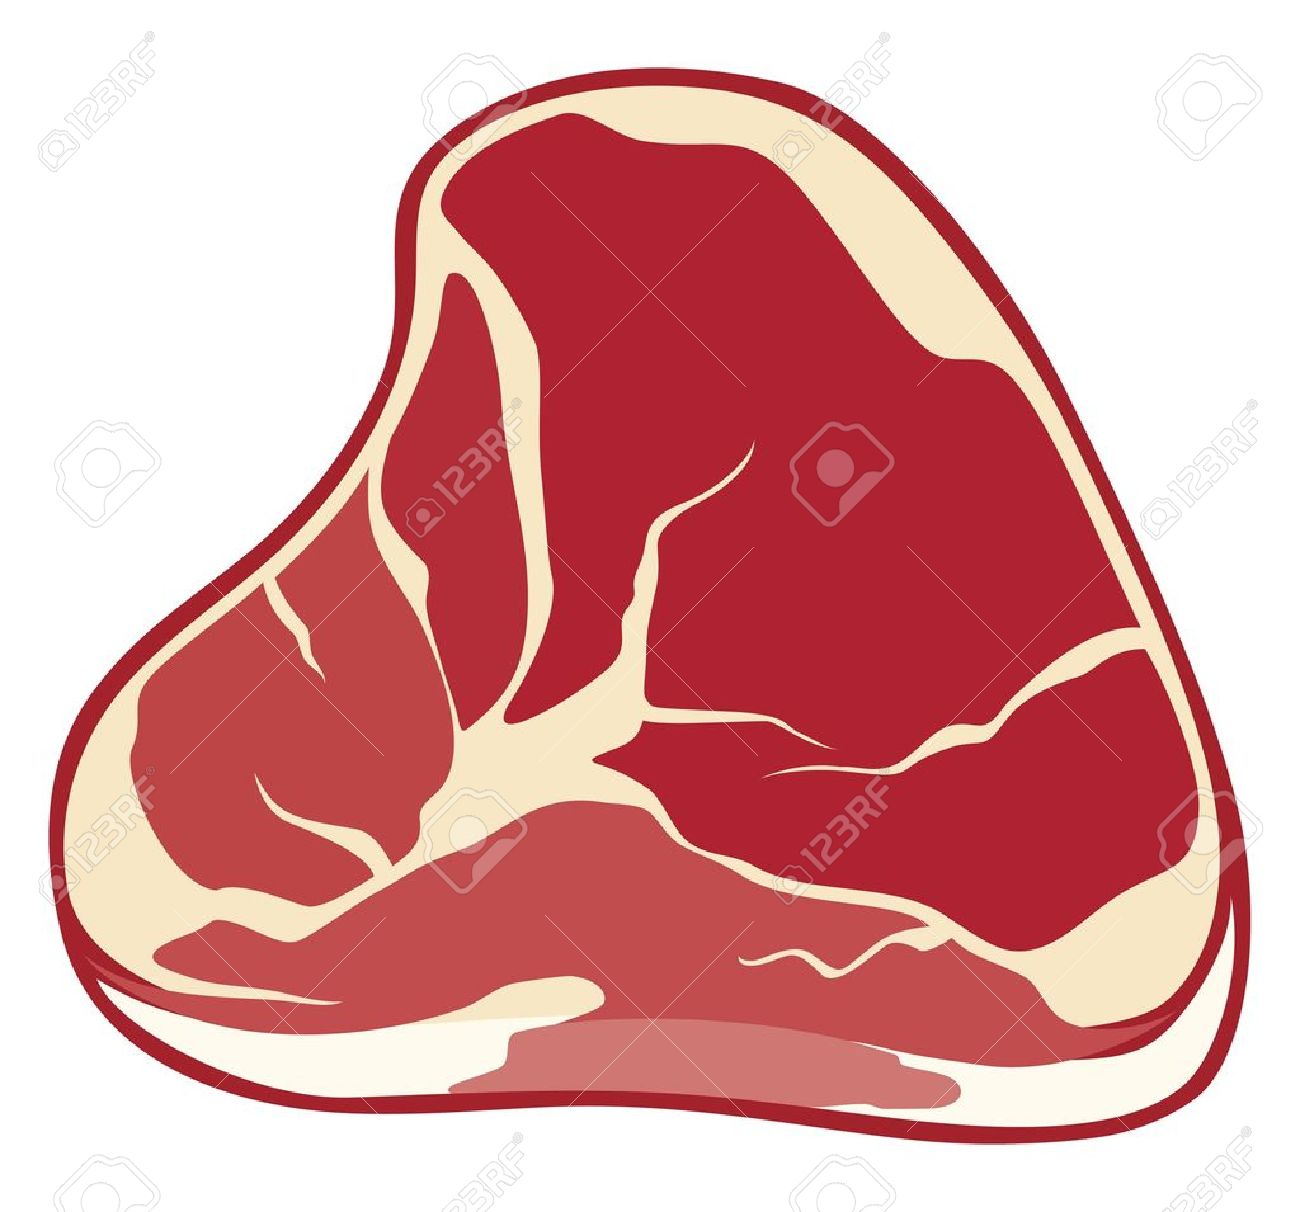 raw meat clipart - photo #10